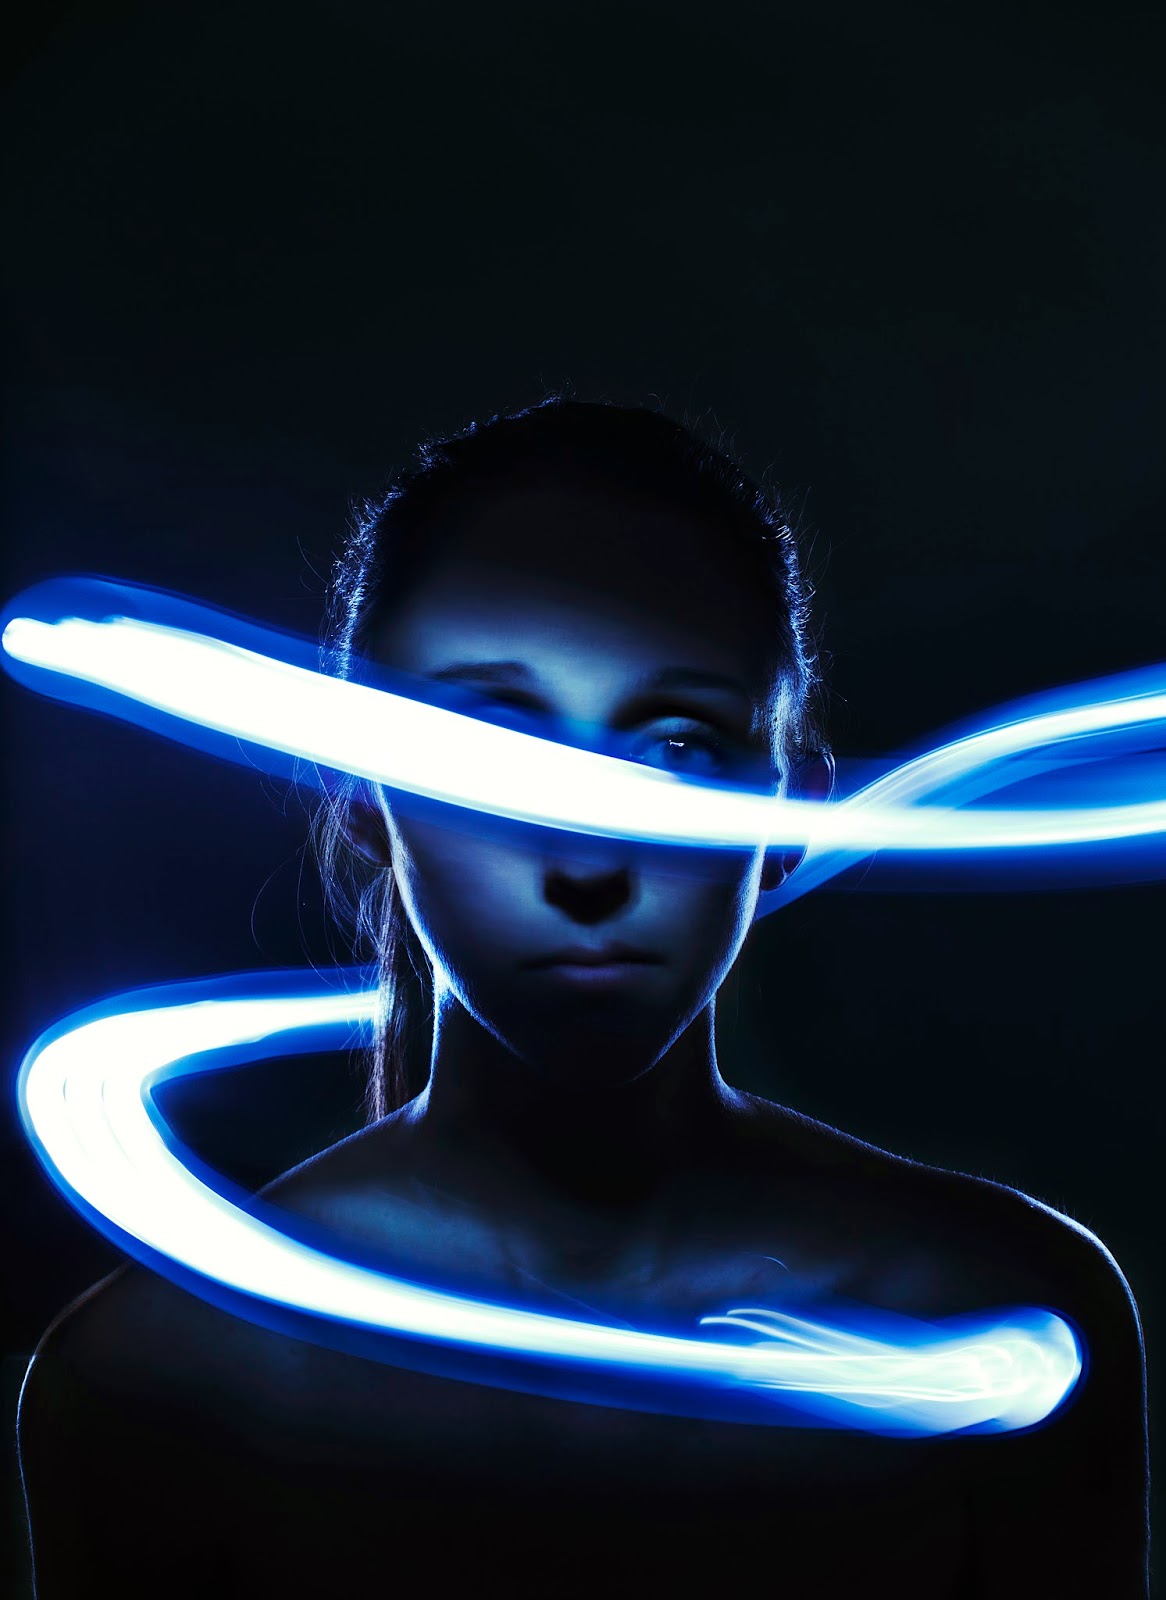 Christa Michelle Photography Light Painting Portraits